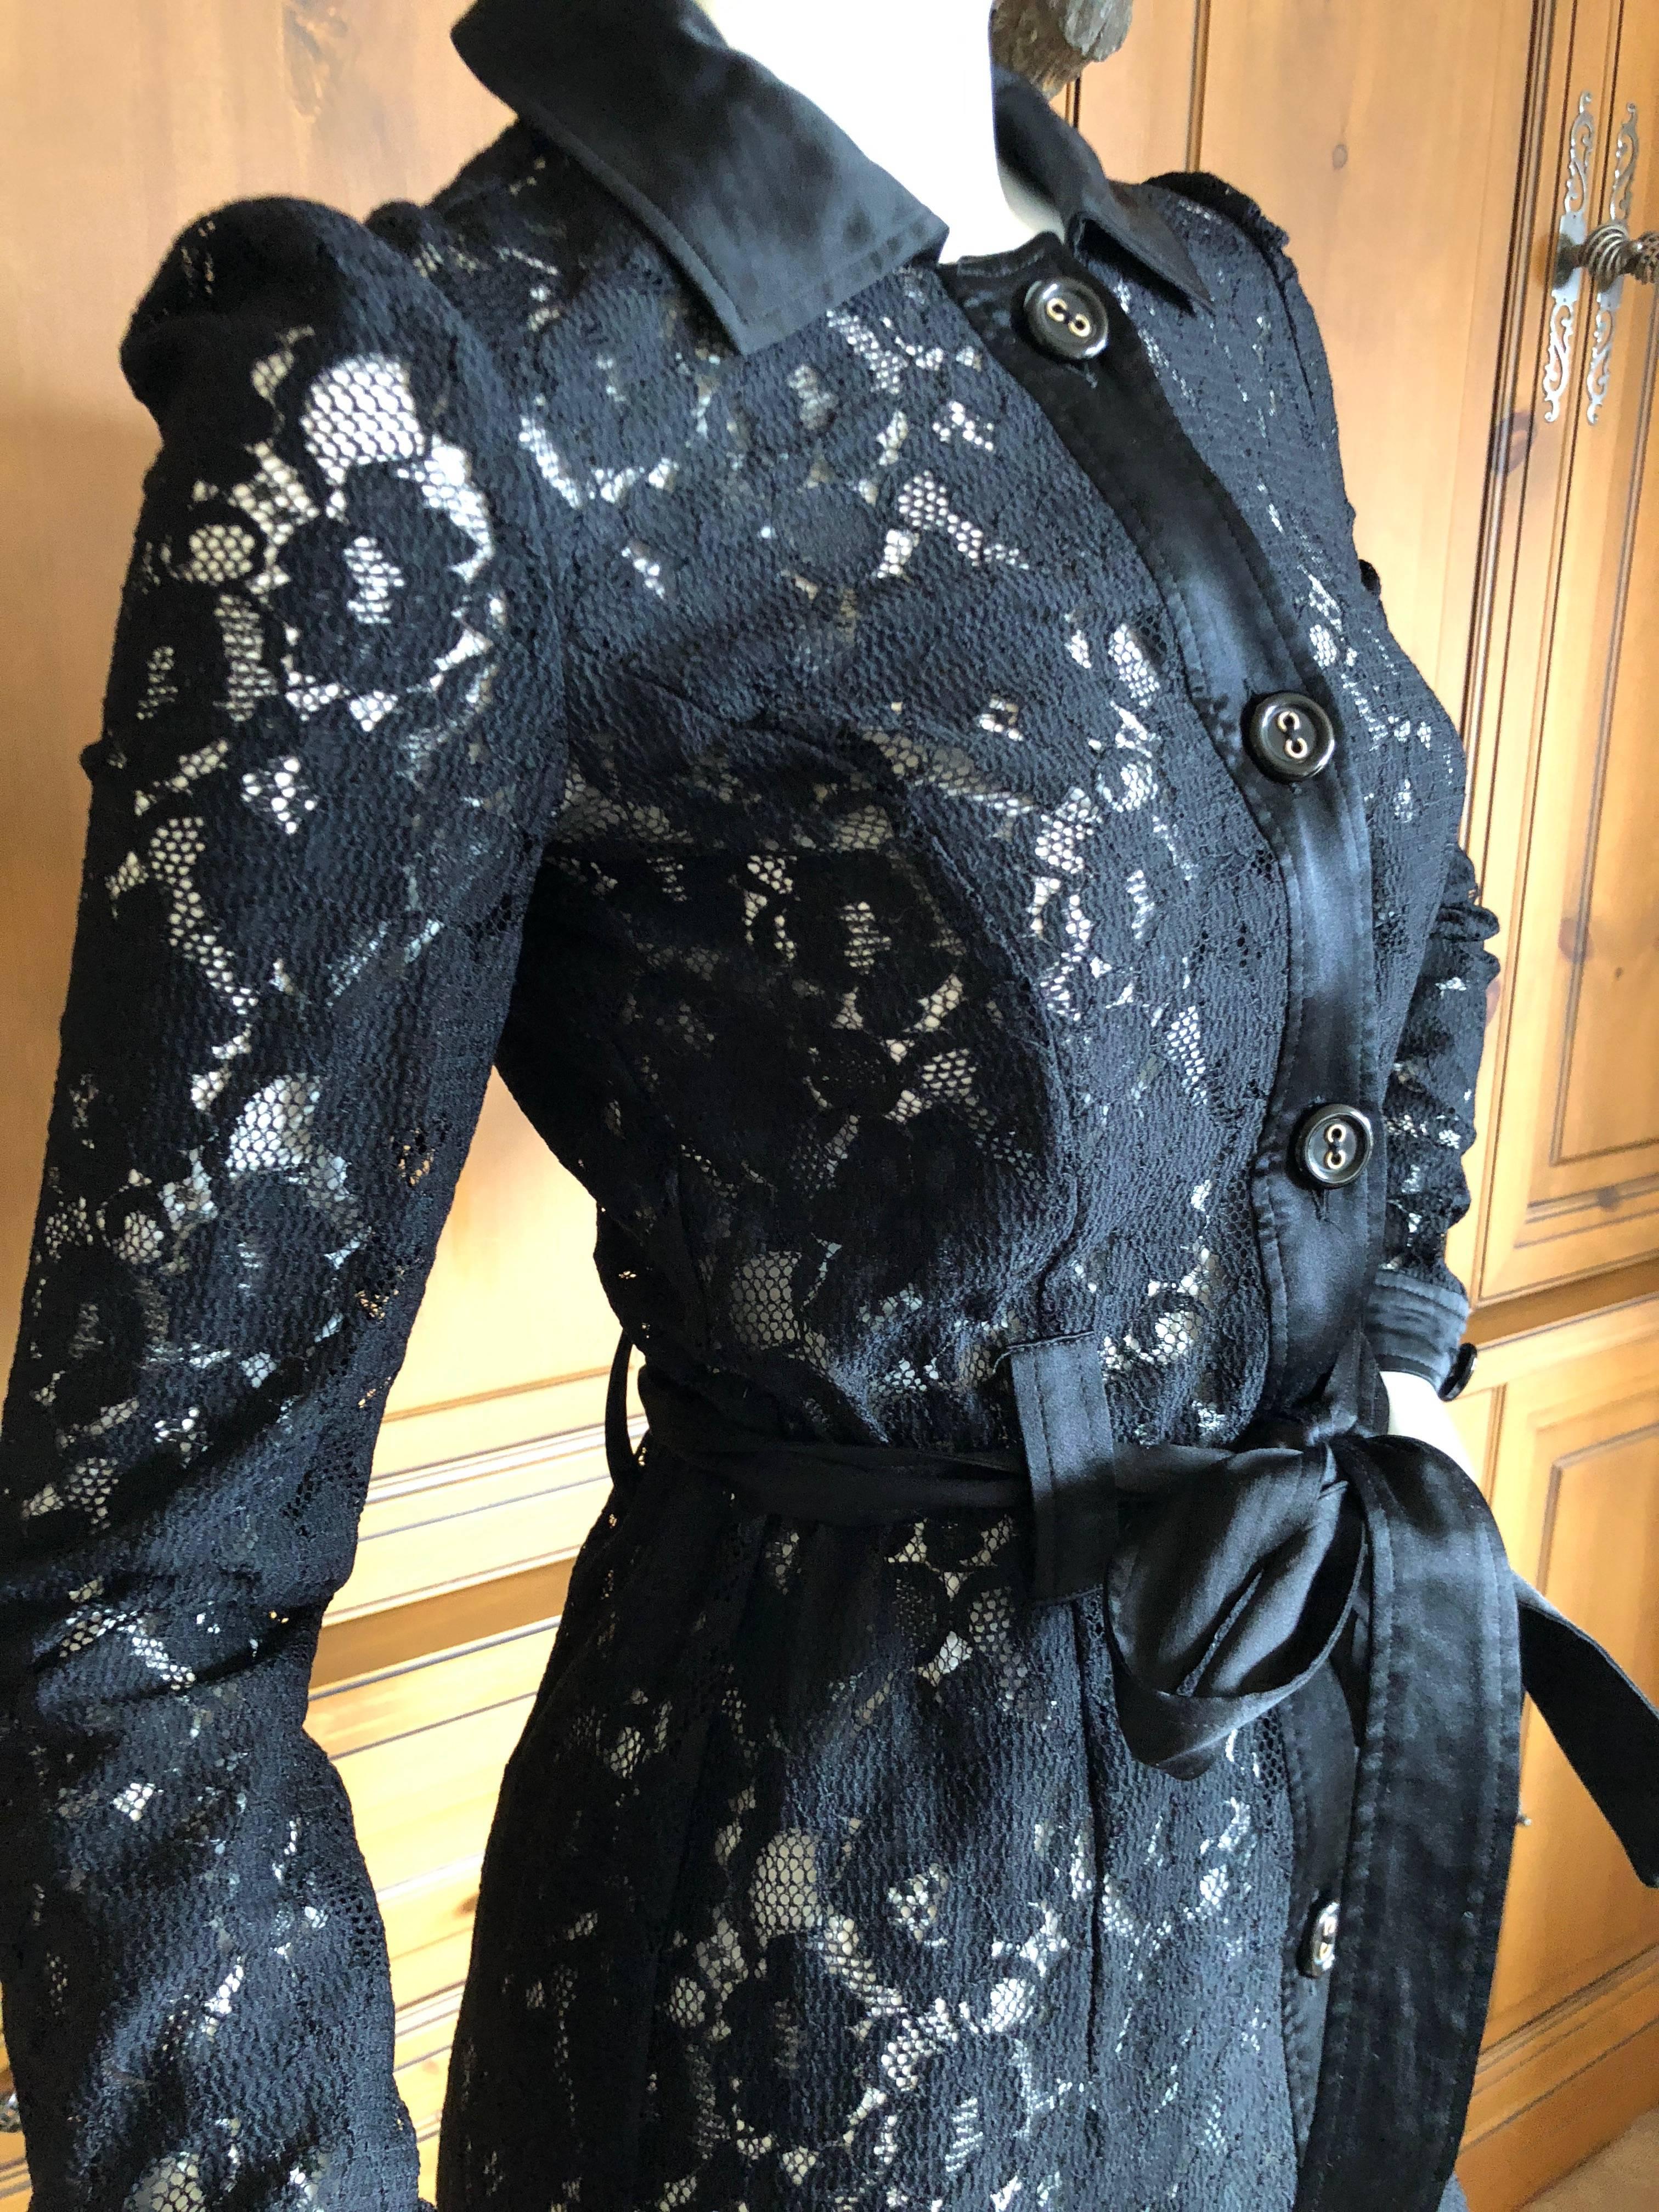 Dolce & Gabbana D&G Vintage Sheer Lace Shirt Dress  In Excellent Condition For Sale In Cloverdale, CA